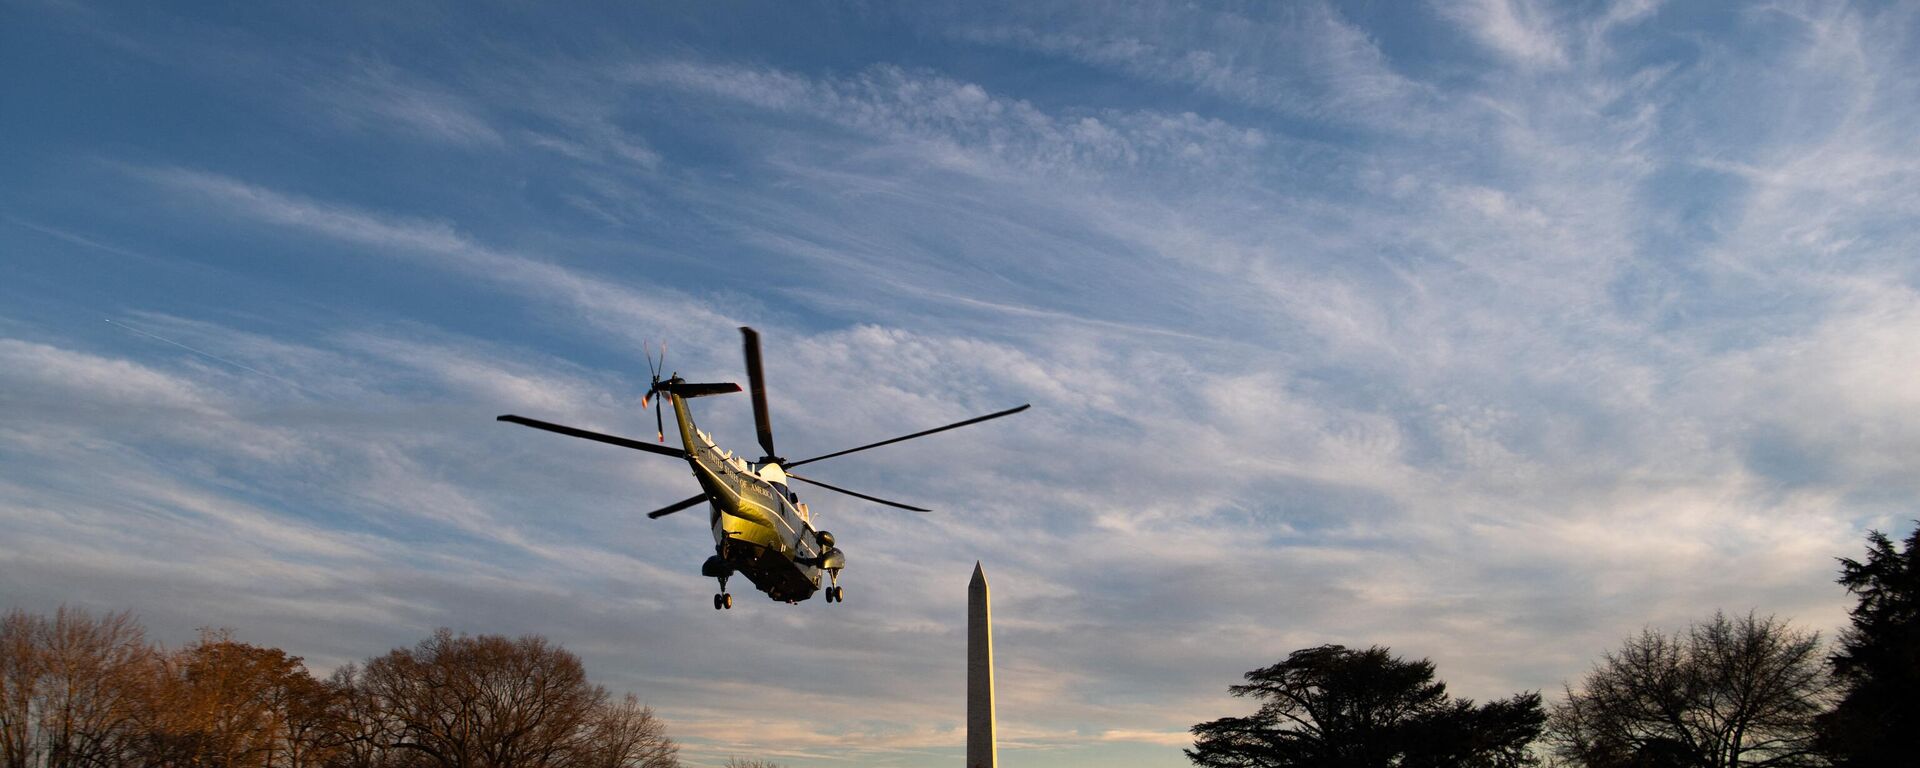 Marine One, with US President Joe Biden and First Lady Jill Biden aboard, departs from the South Lawn of the White House in Washington, DC, as they travel to spend the weekend in Wilmington, Delaware. File photo. - Sputnik International, 1920, 12.01.2023